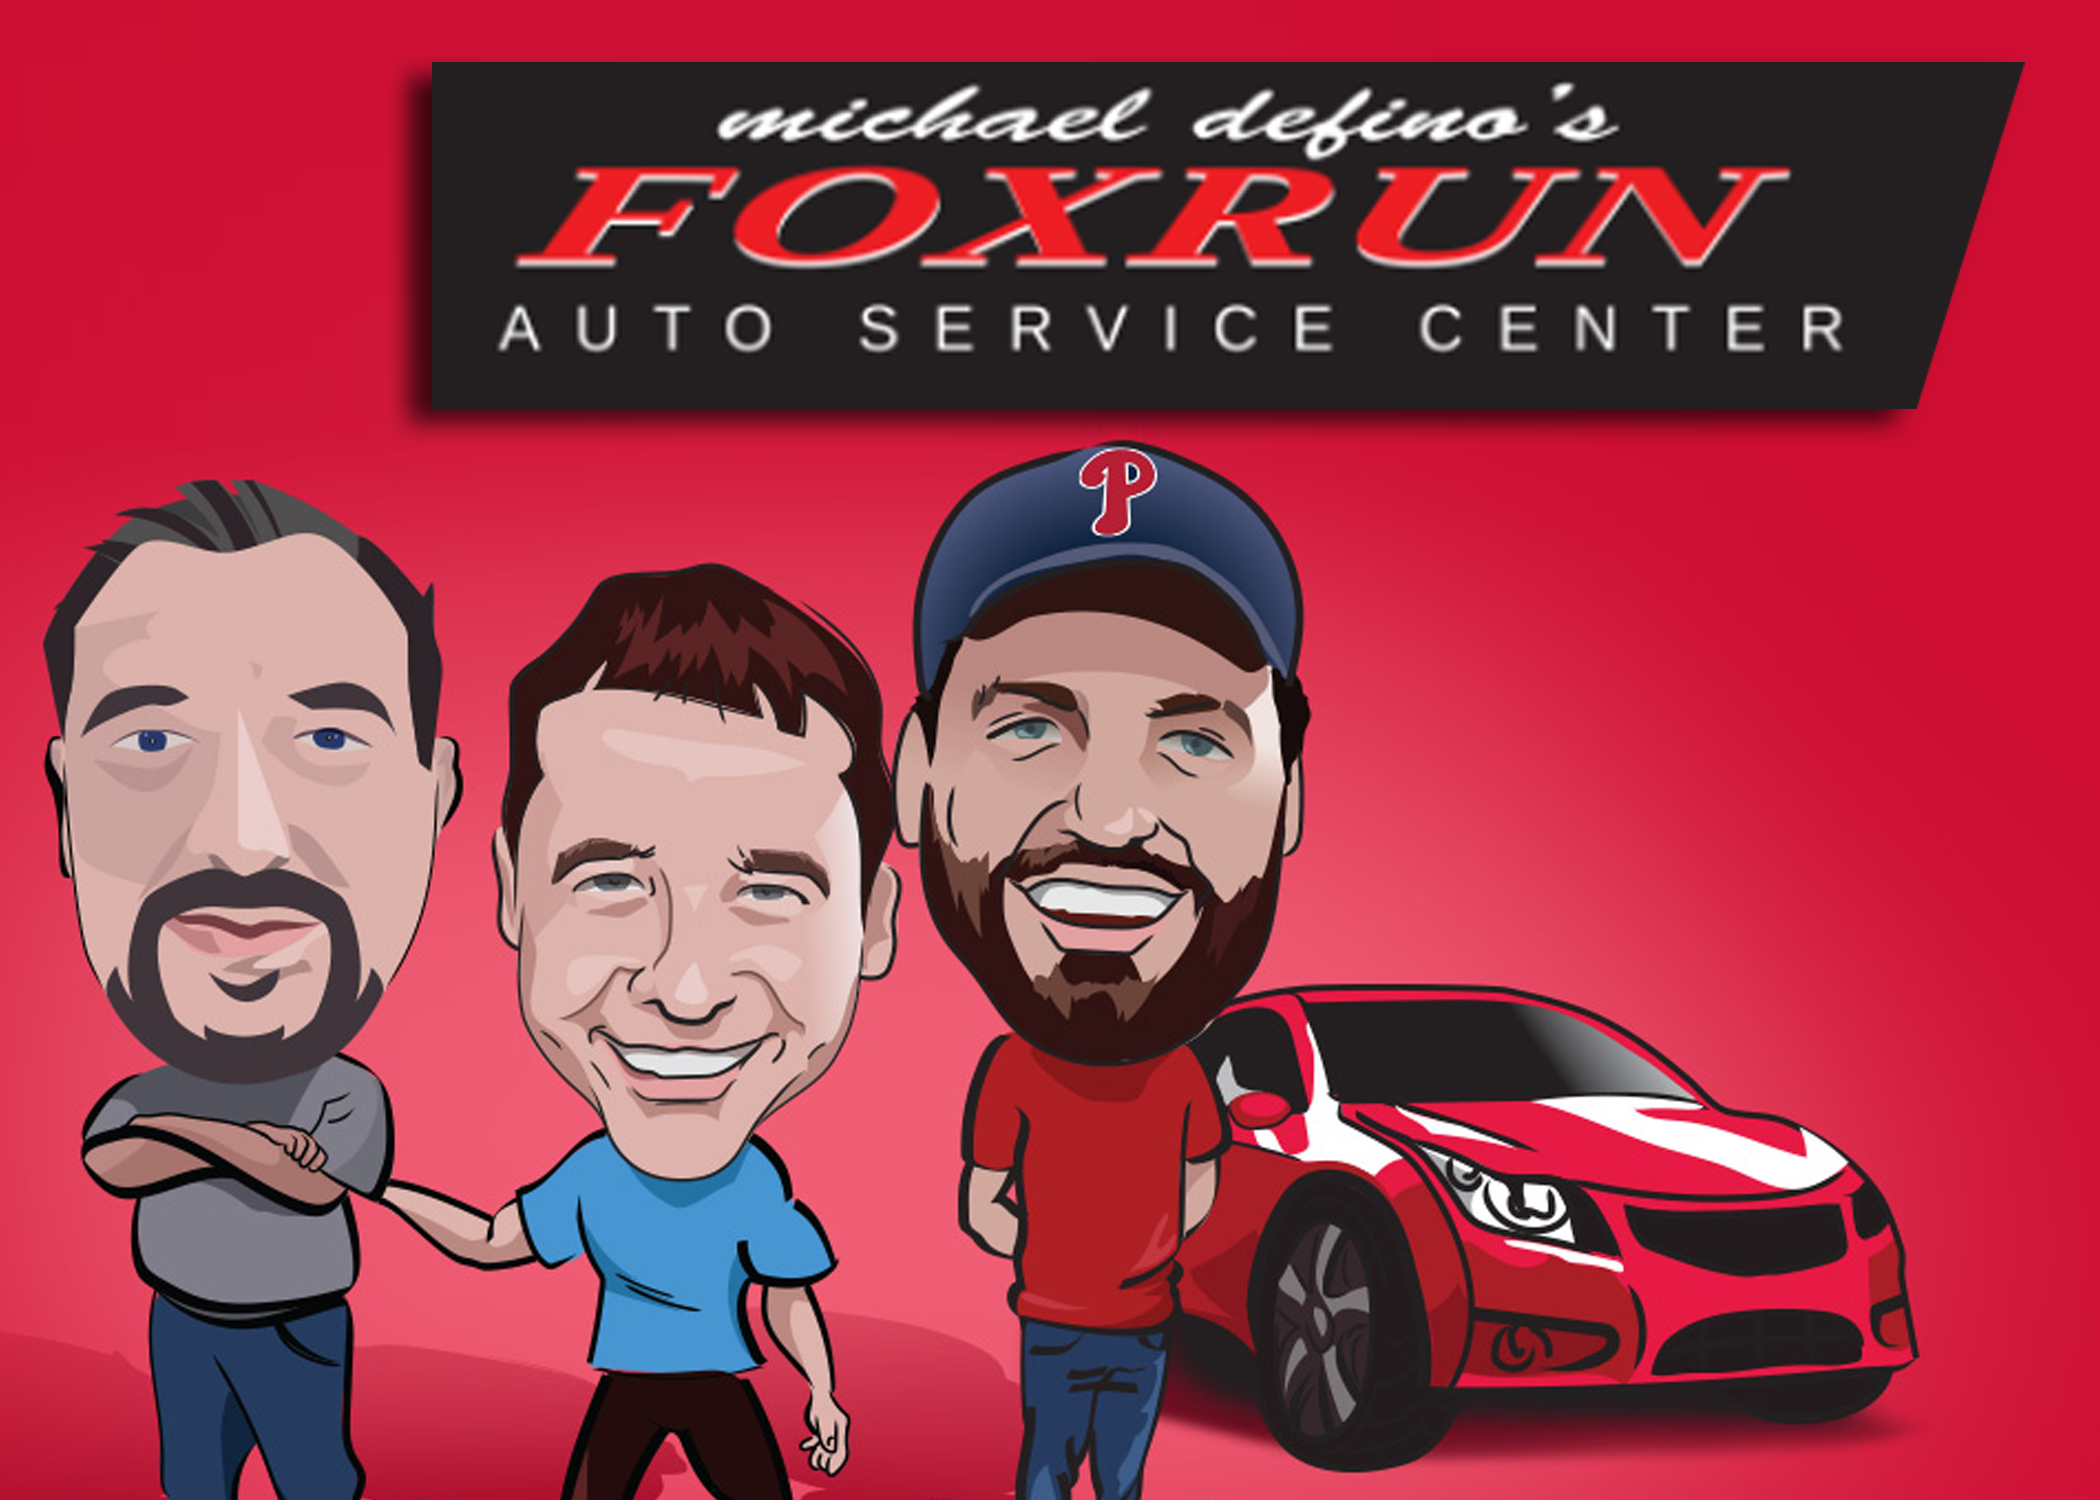 We Want Your Reviews of Fox Run Auto!